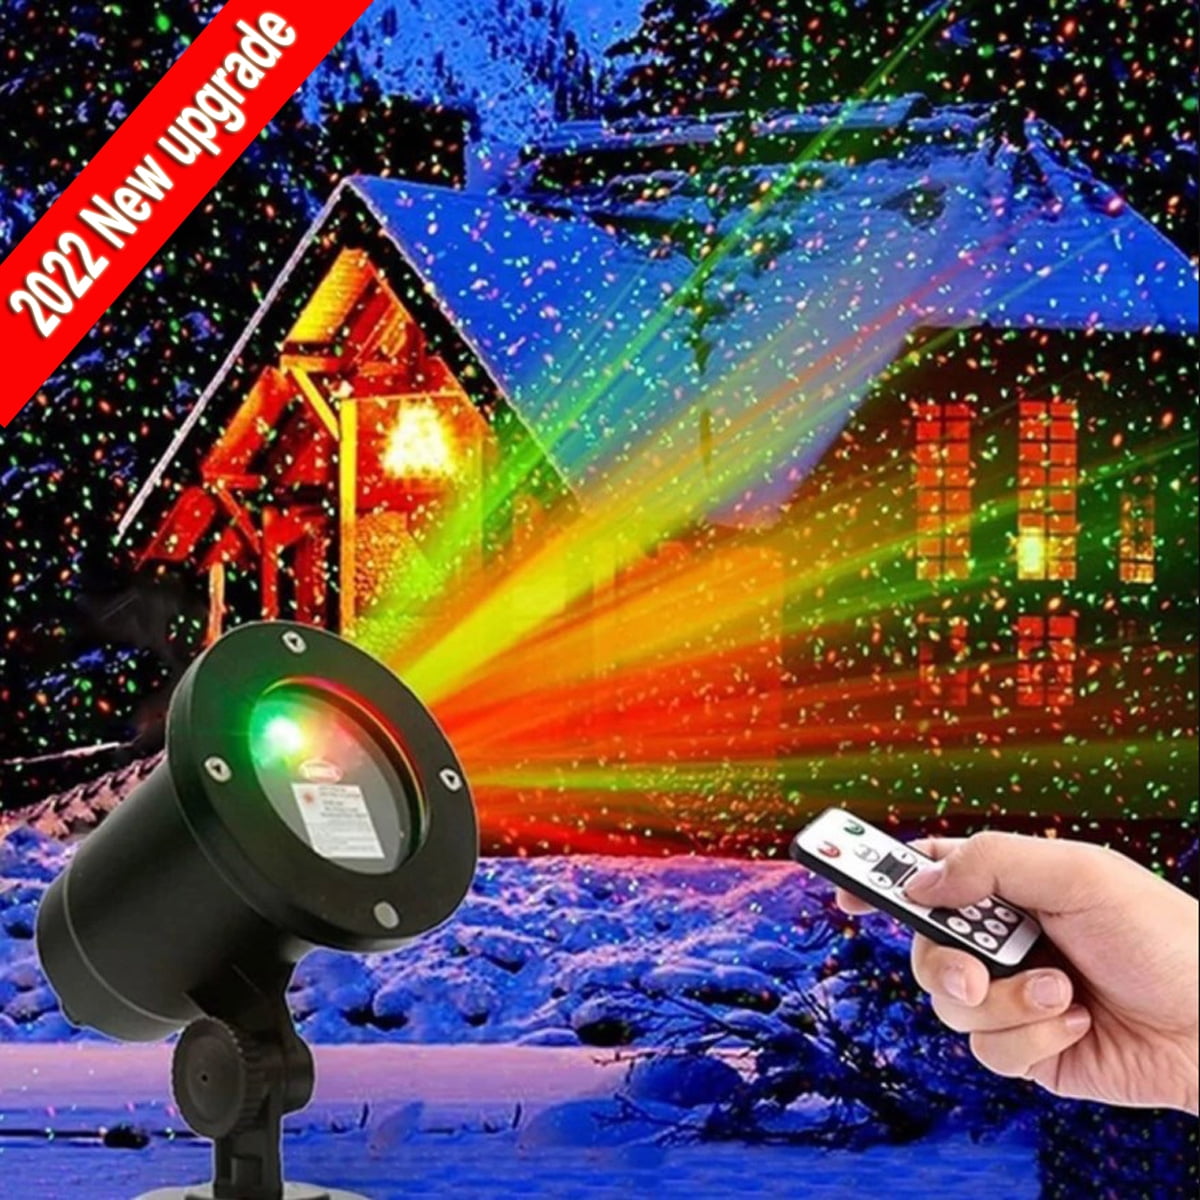 Laser Christmas Projector Lights Outdoor, Tanbaby 3 Color Laser